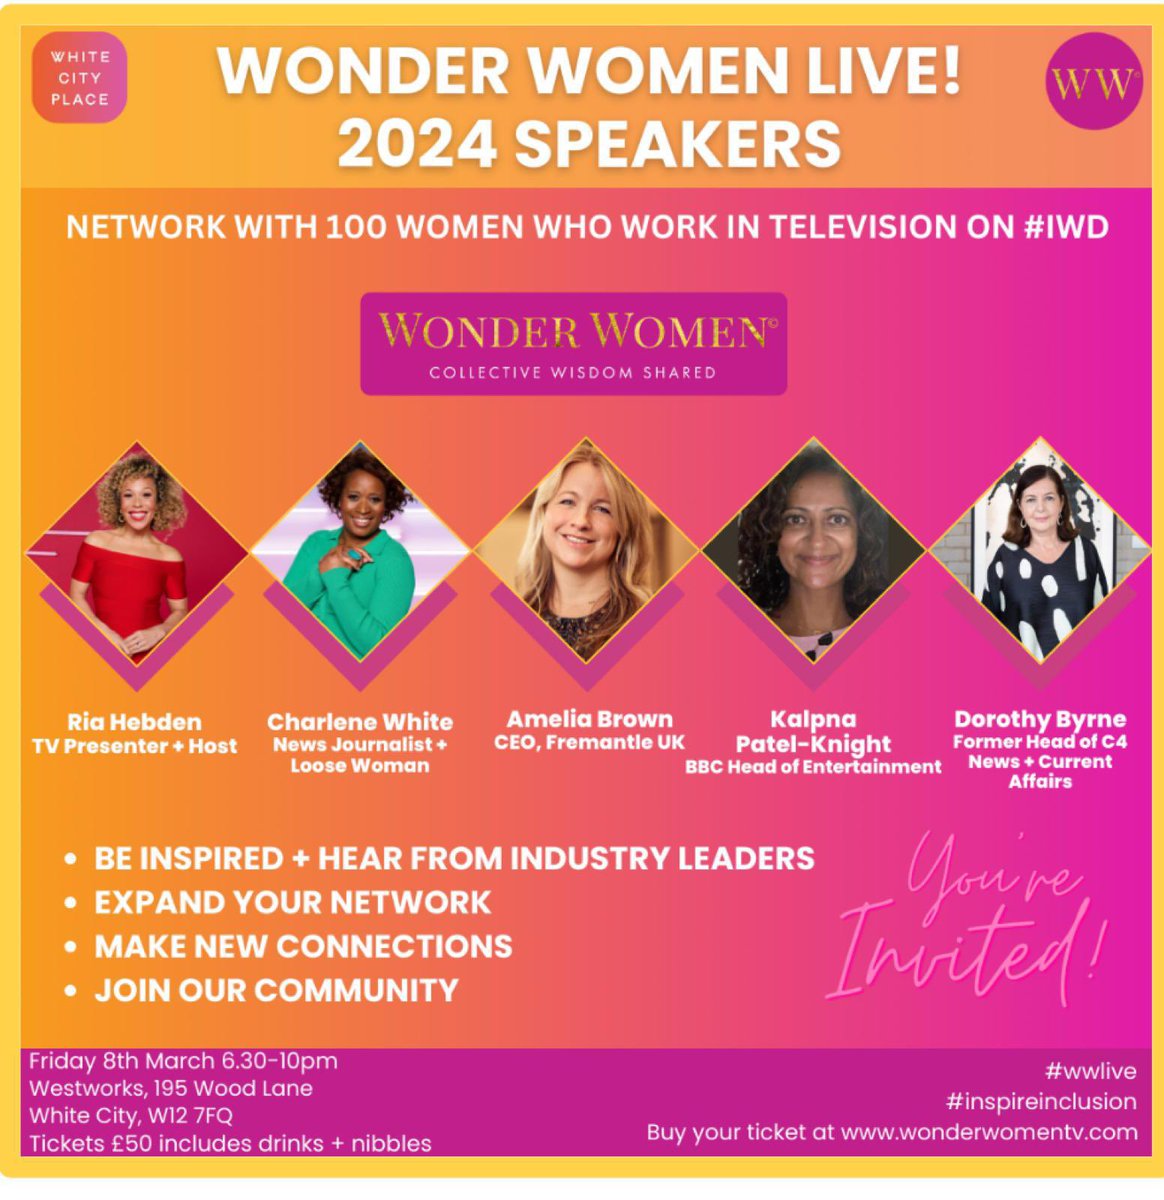 Such a wonderful and inspiring way to end International Women's Day!! Thank you Ria and to your influential, motivating speakers who lifted the roof and all our spirits 😇❤️😇 @riahebden @WonderWomenTVUK @CharleneWhite